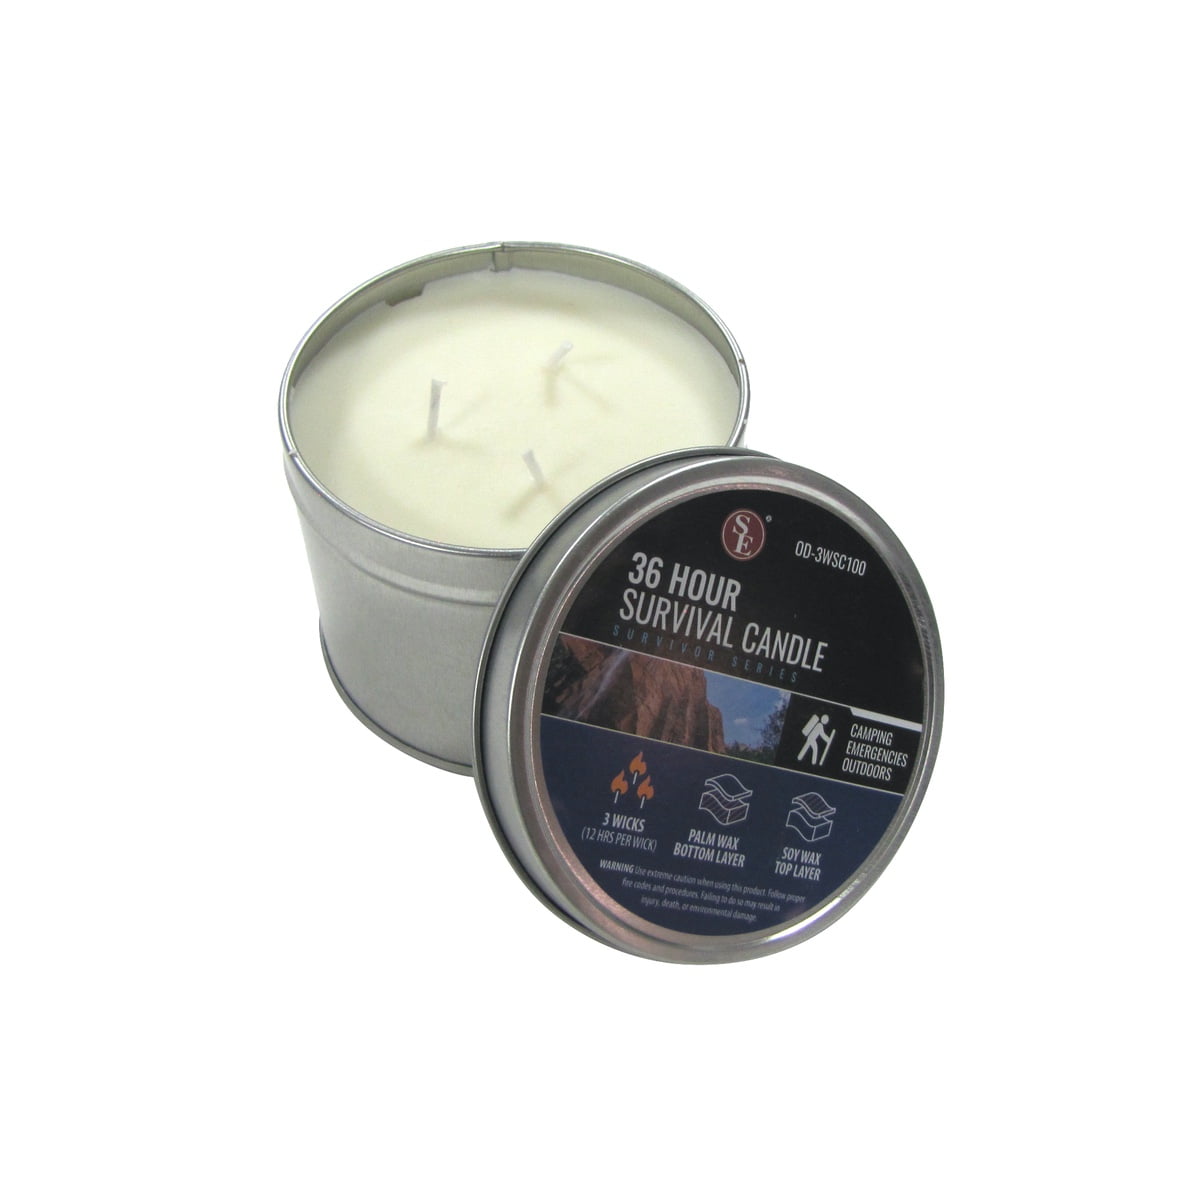 Coghlan's Survival Candle with 3 Wicks Bulk Includes Matches Burns 36 Hours 